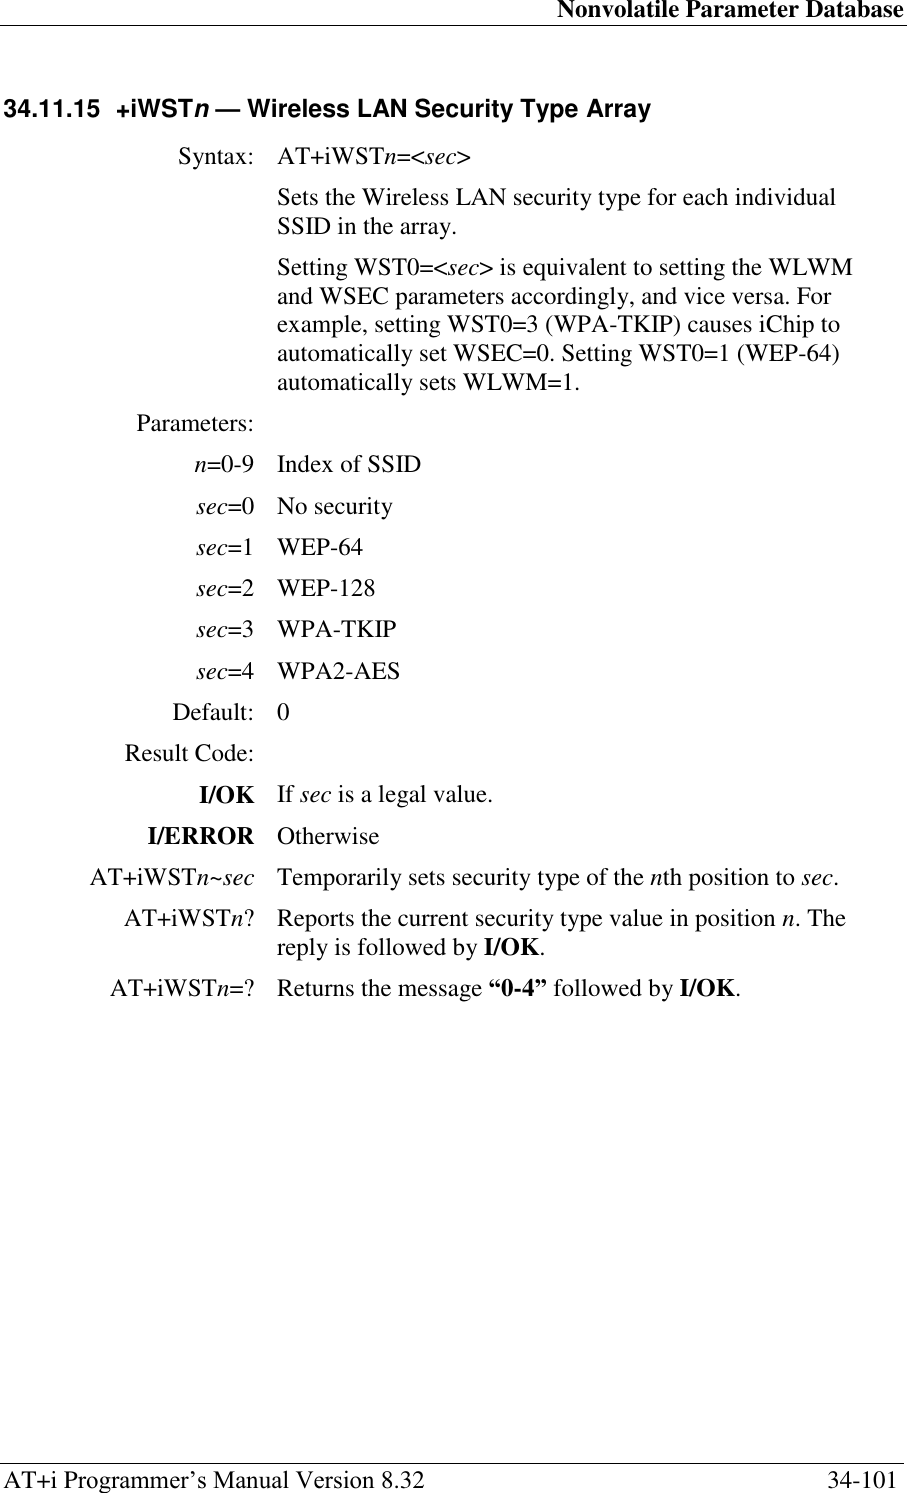 Nonvolatile Parameter Database AT+i Programmer‘s Manual Version 8.32  34-101 34.11.15  +iWSTn — Wireless LAN Security Type Array  Syntax: AT+iWSTn=&lt;sec&gt;  Sets the Wireless LAN security type for each individual SSID in the array. Setting WST0=&lt;sec&gt; is equivalent to setting the WLWM and WSEC parameters accordingly, and vice versa. For example, setting WST0=3 (WPA-TKIP) causes iChip to automatically set WSEC=0. Setting WST0=1 (WEP-64) automatically sets WLWM=1. Parameters:  n=0-9 Index of SSID sec=0 No security sec=1 WEP-64 sec=2 WEP-128 sec=3 WPA-TKIP sec=4 WPA2-AES Default: 0 Result Code:  I/OK If sec is a legal value. I/ERROR Otherwise AT+iWSTn~sec Temporarily sets security type of the nth position to sec. AT+iWSTn? Reports the current security type value in position n. The reply is followed by I/OK. AT+iWSTn=? Returns the message “0-4” followed by I/OK.   